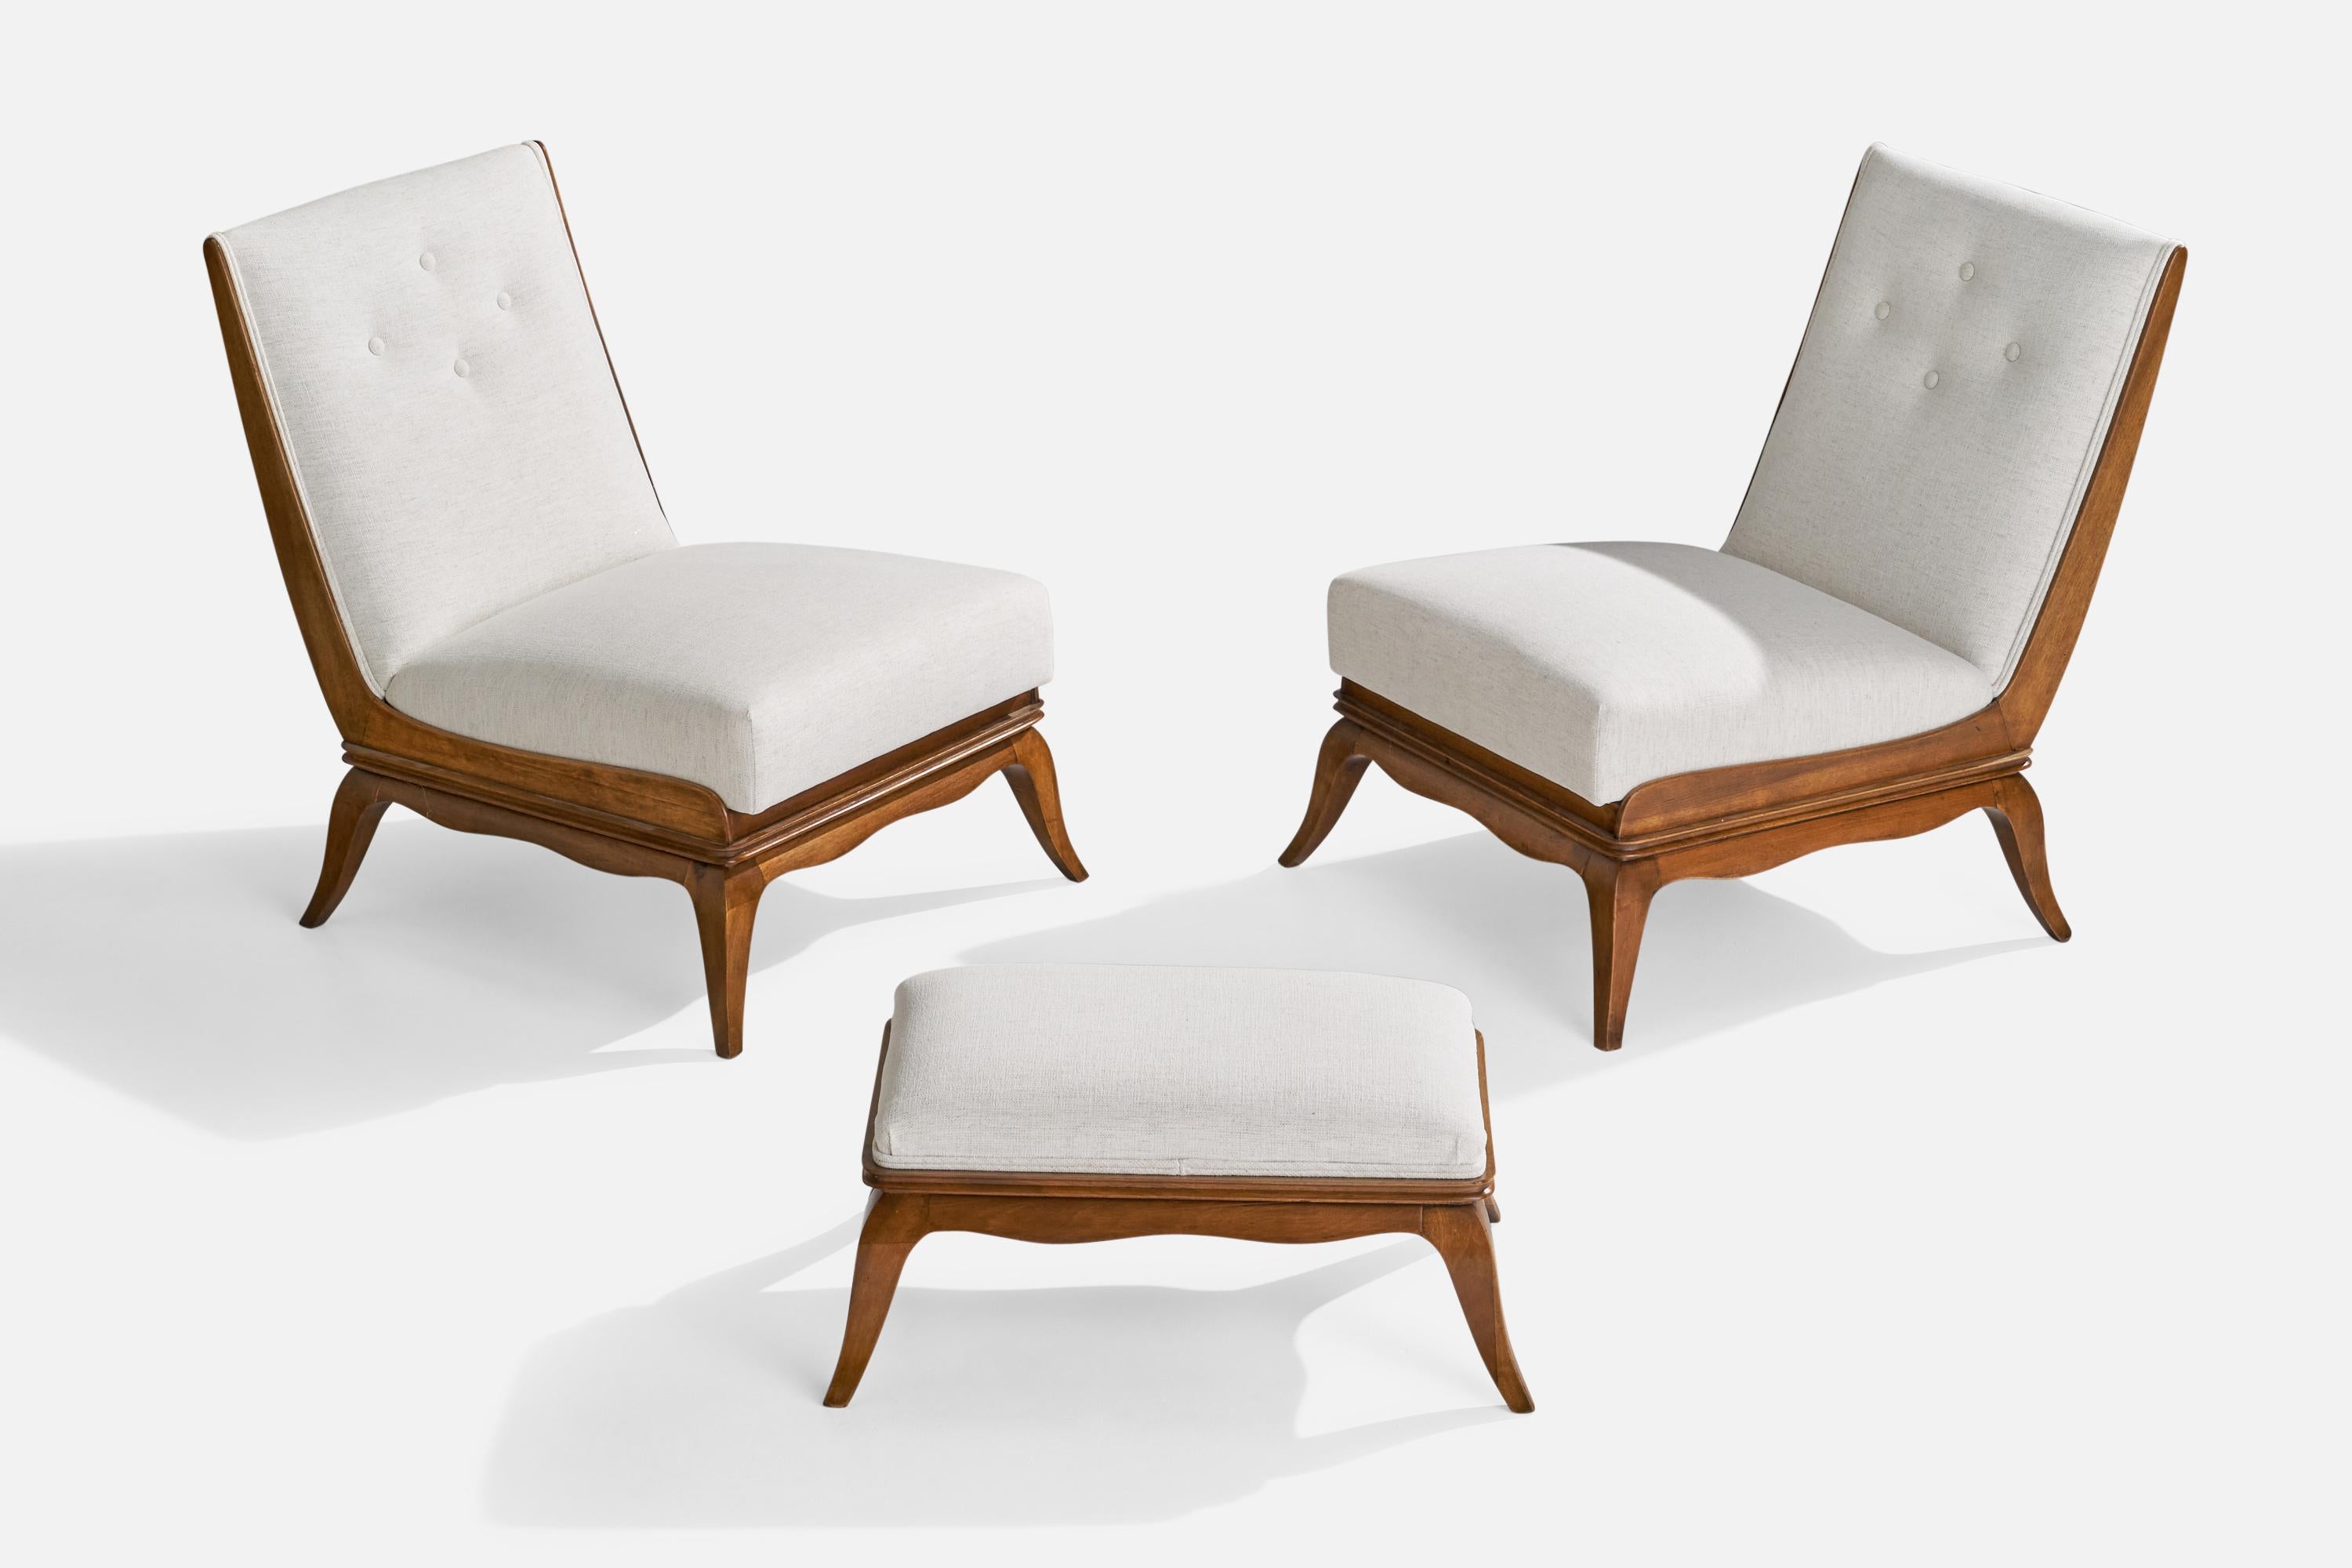 A pair of walnut and white fabric slipper lounge chairs with ottoman designed and produced in Italy c. 1940s. 

Seat height 15”.
ottoman dimensions  11.5” H x 24” W x 15.5” D